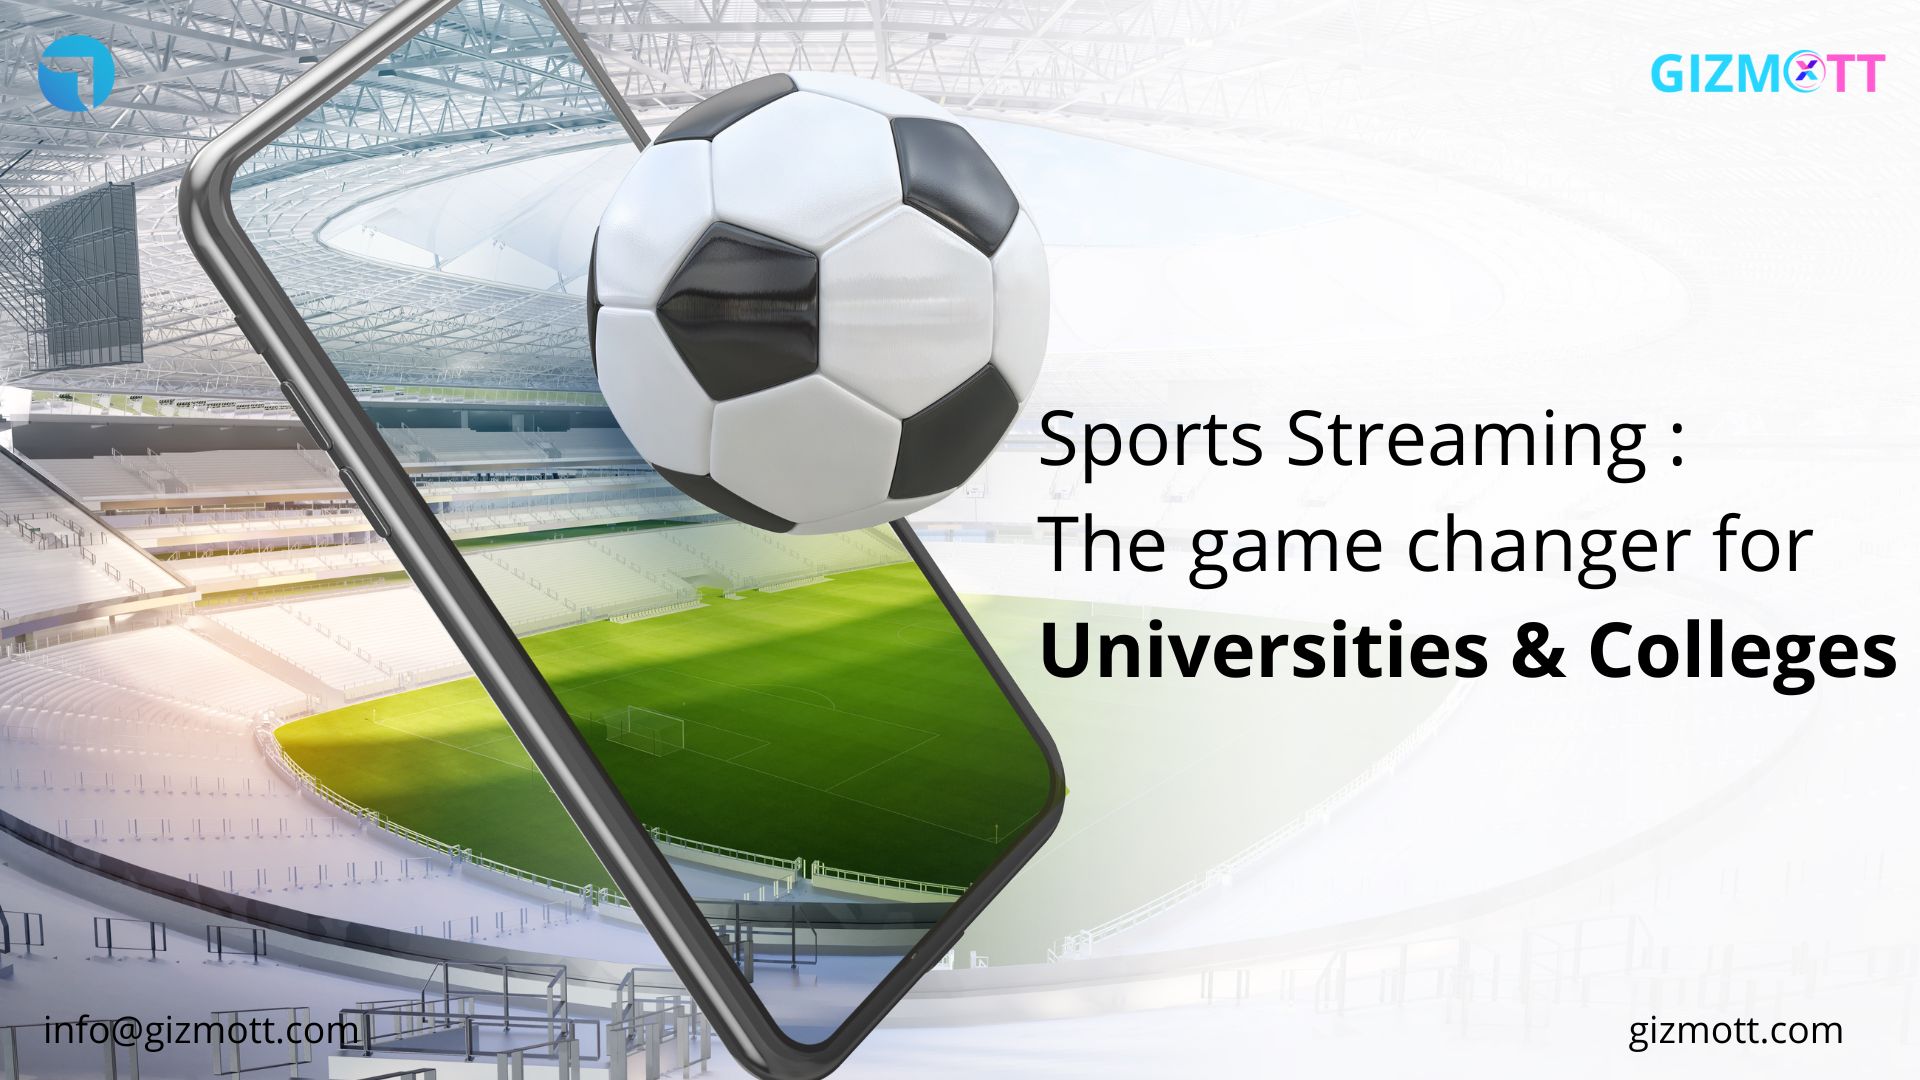 Why should universities and colleges launch their own sports streaming platform?